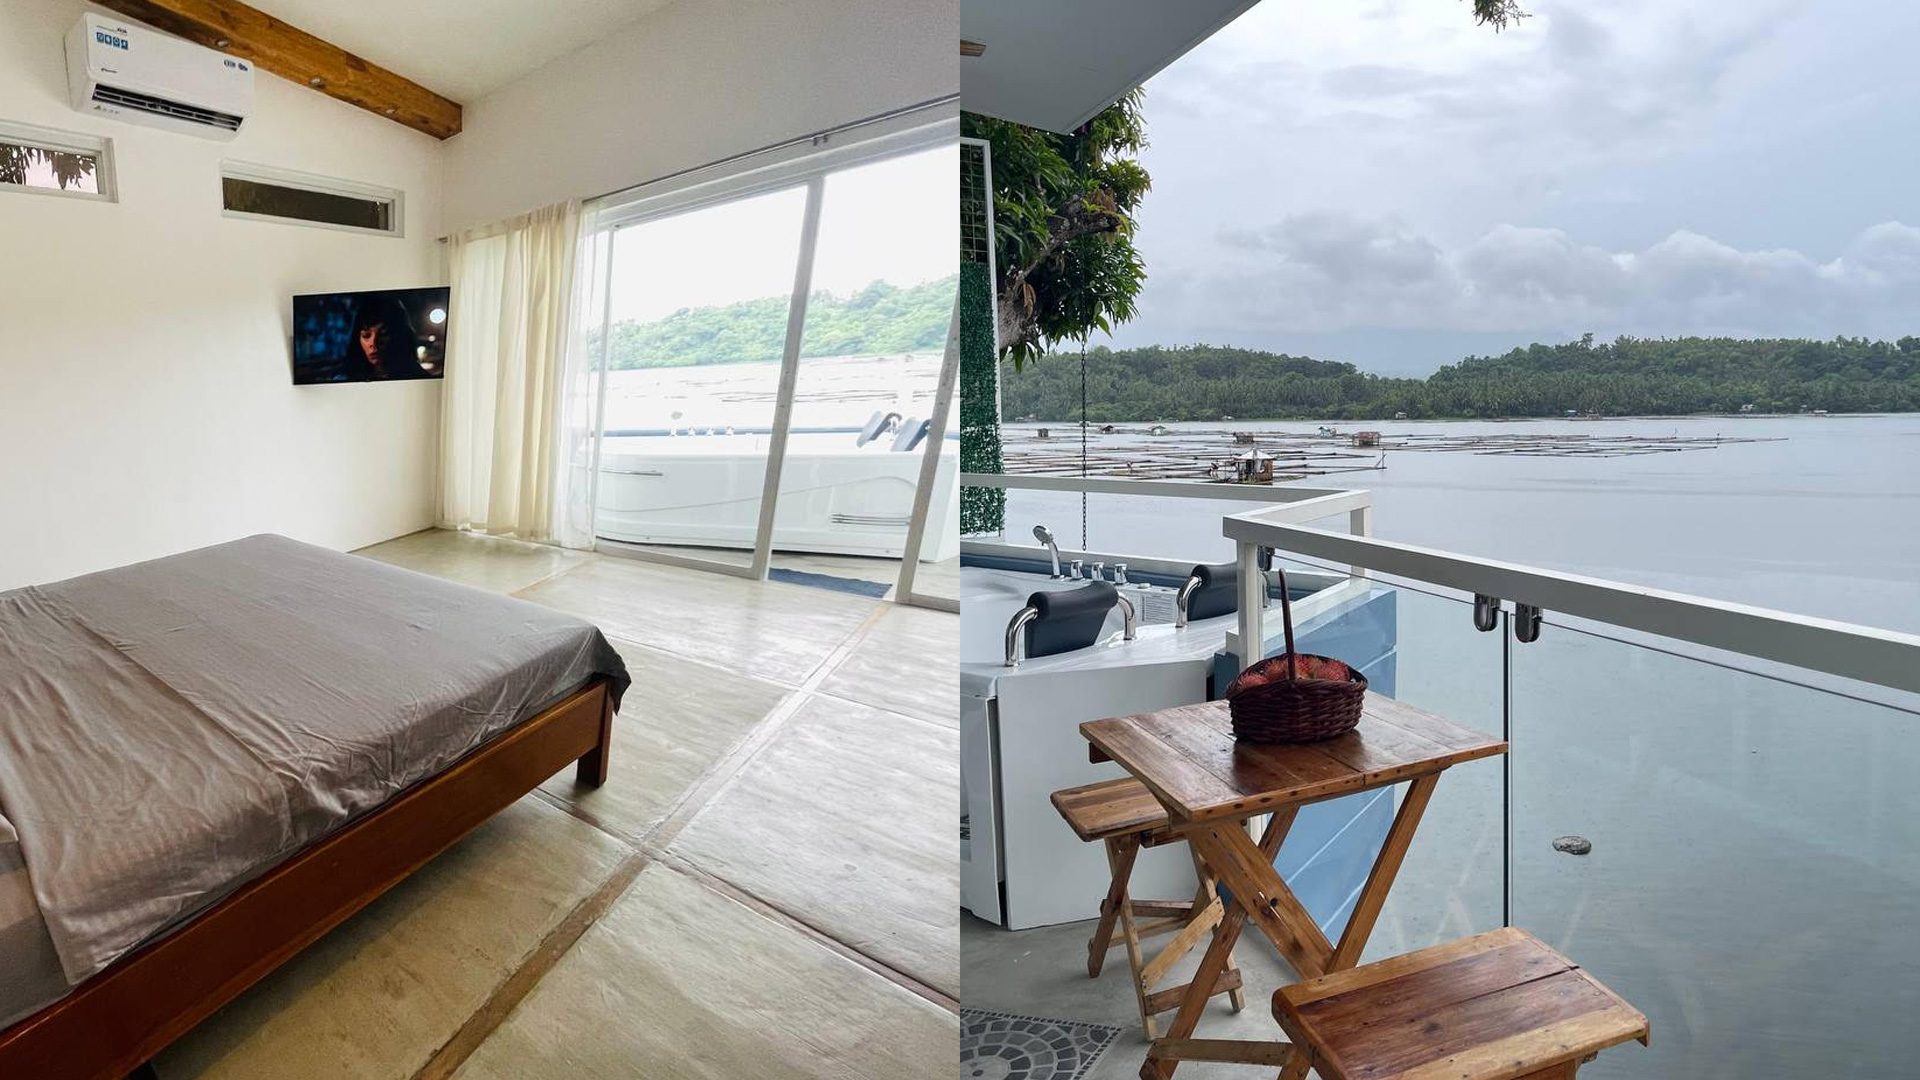 LOOK: This lakeside Airbnb in Laguna offers break from the city with stunning panoramic views